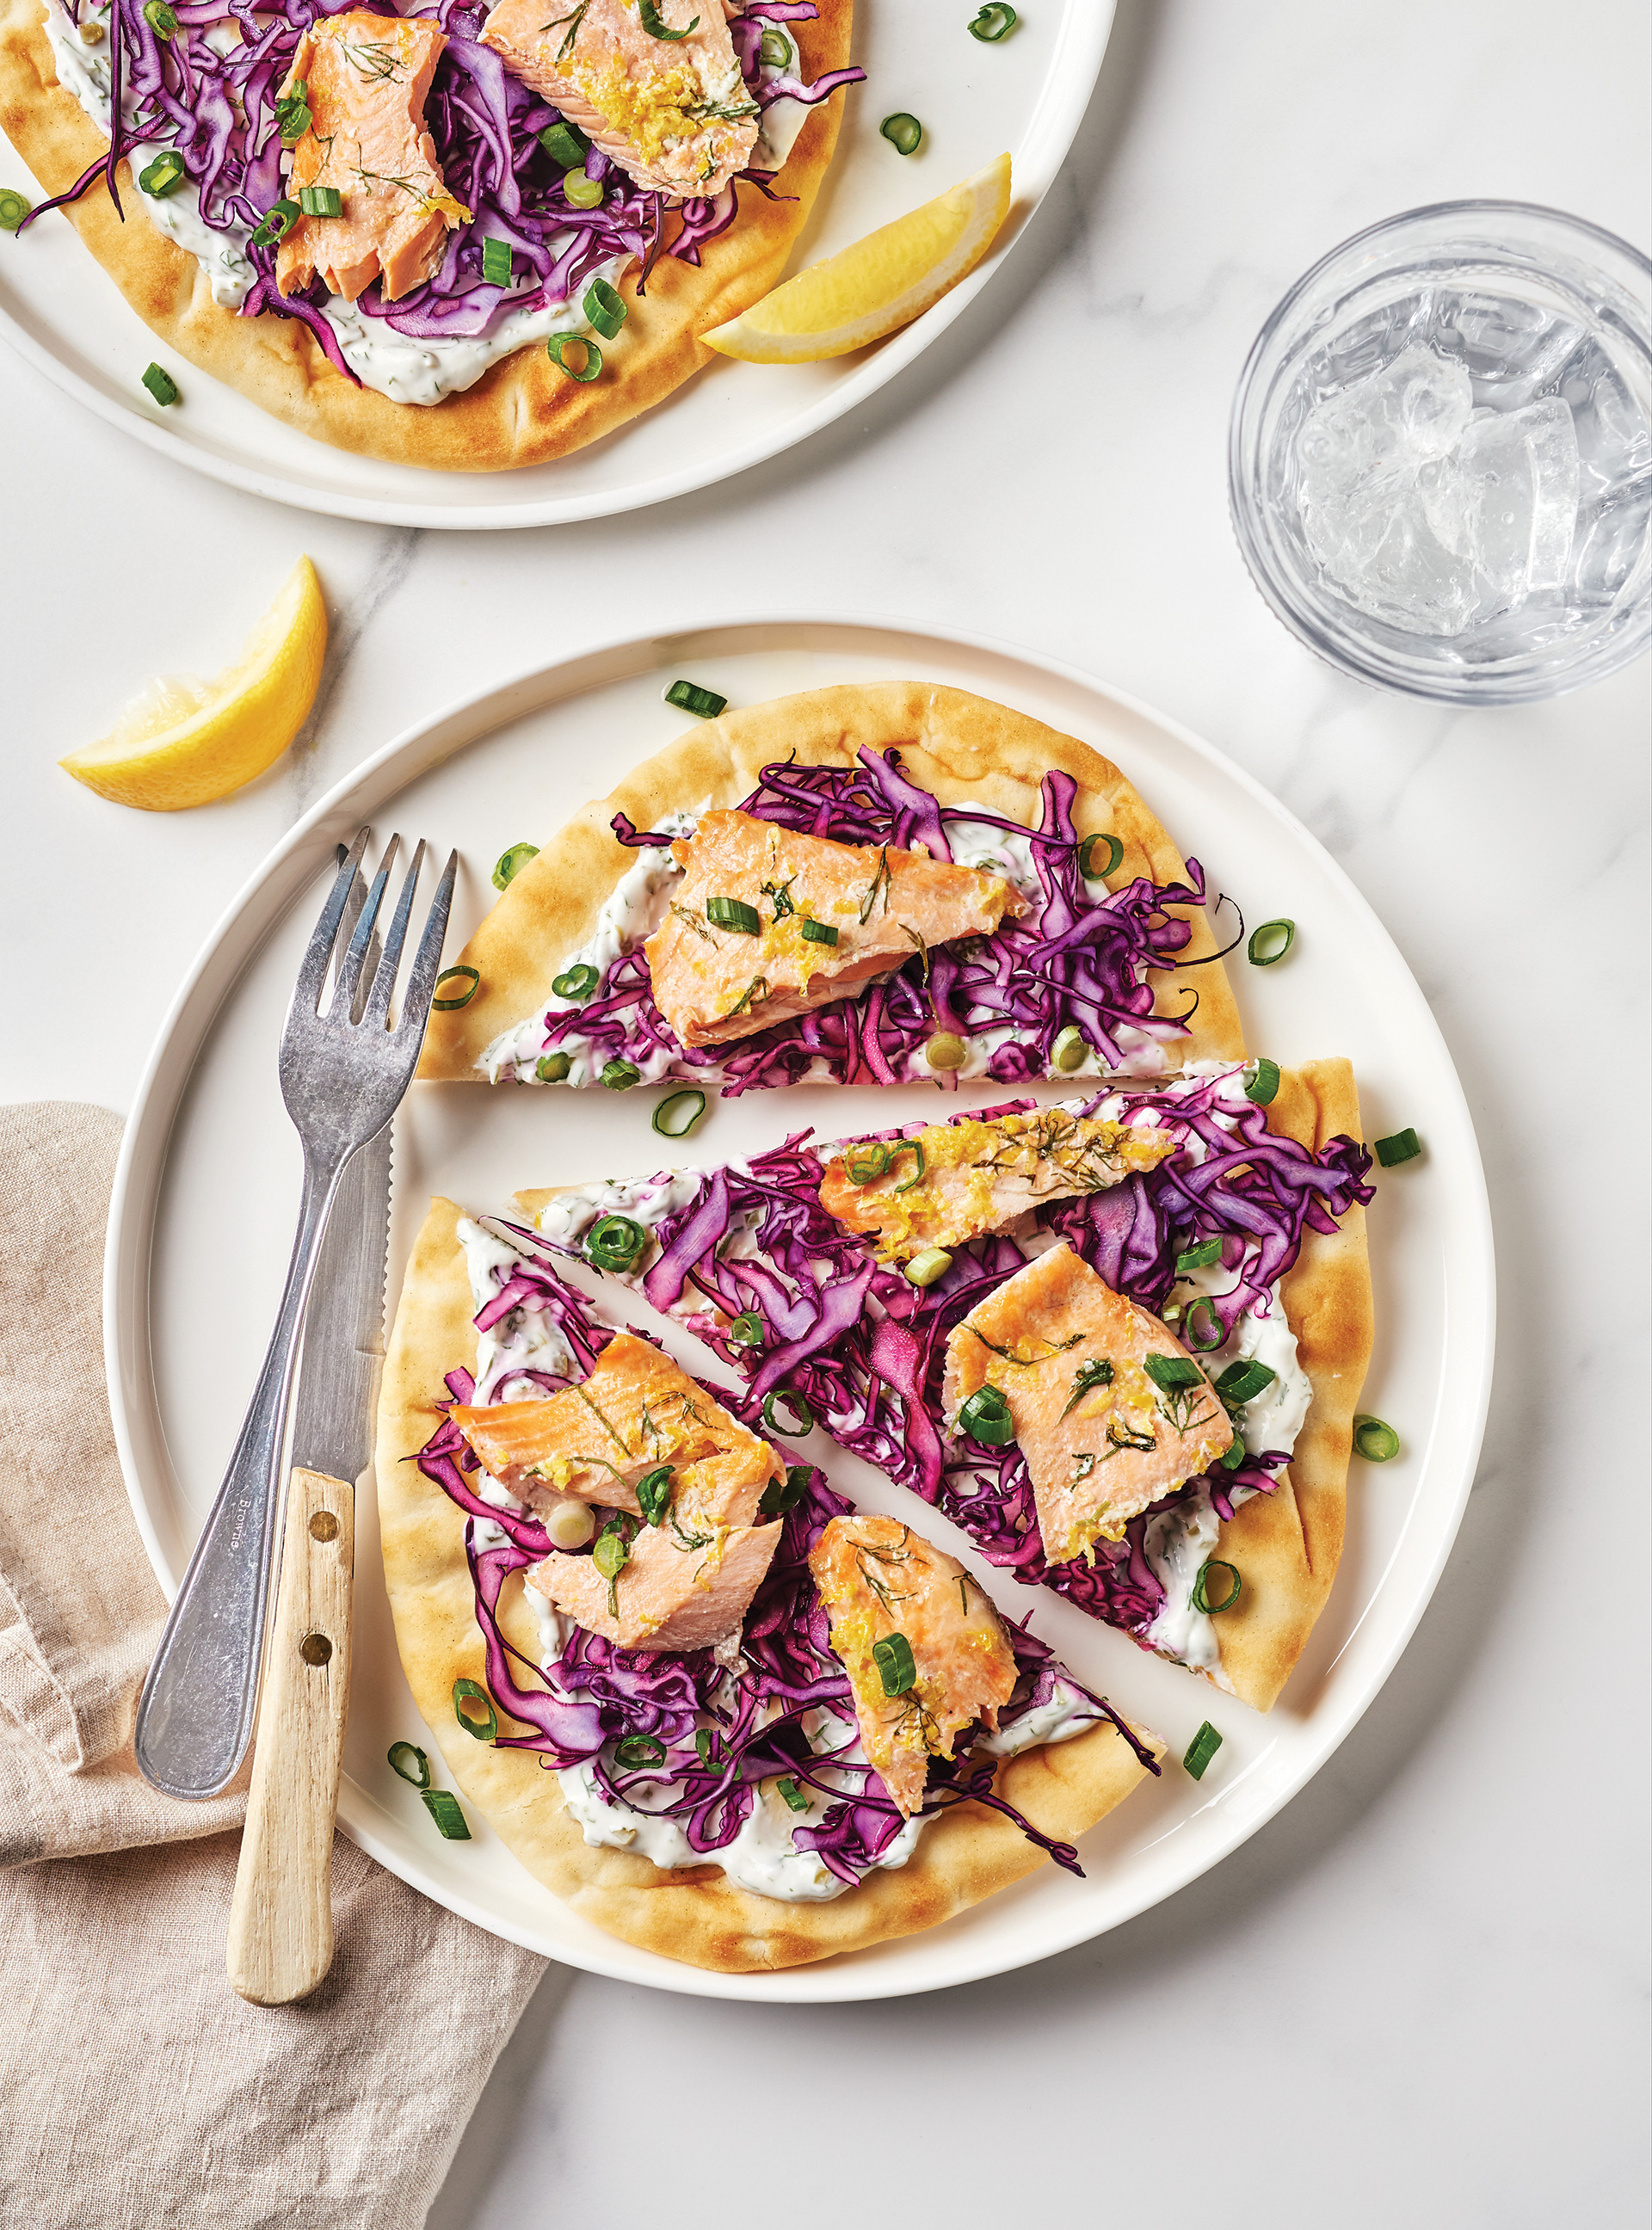 Trout and Red Cabbage on Naan